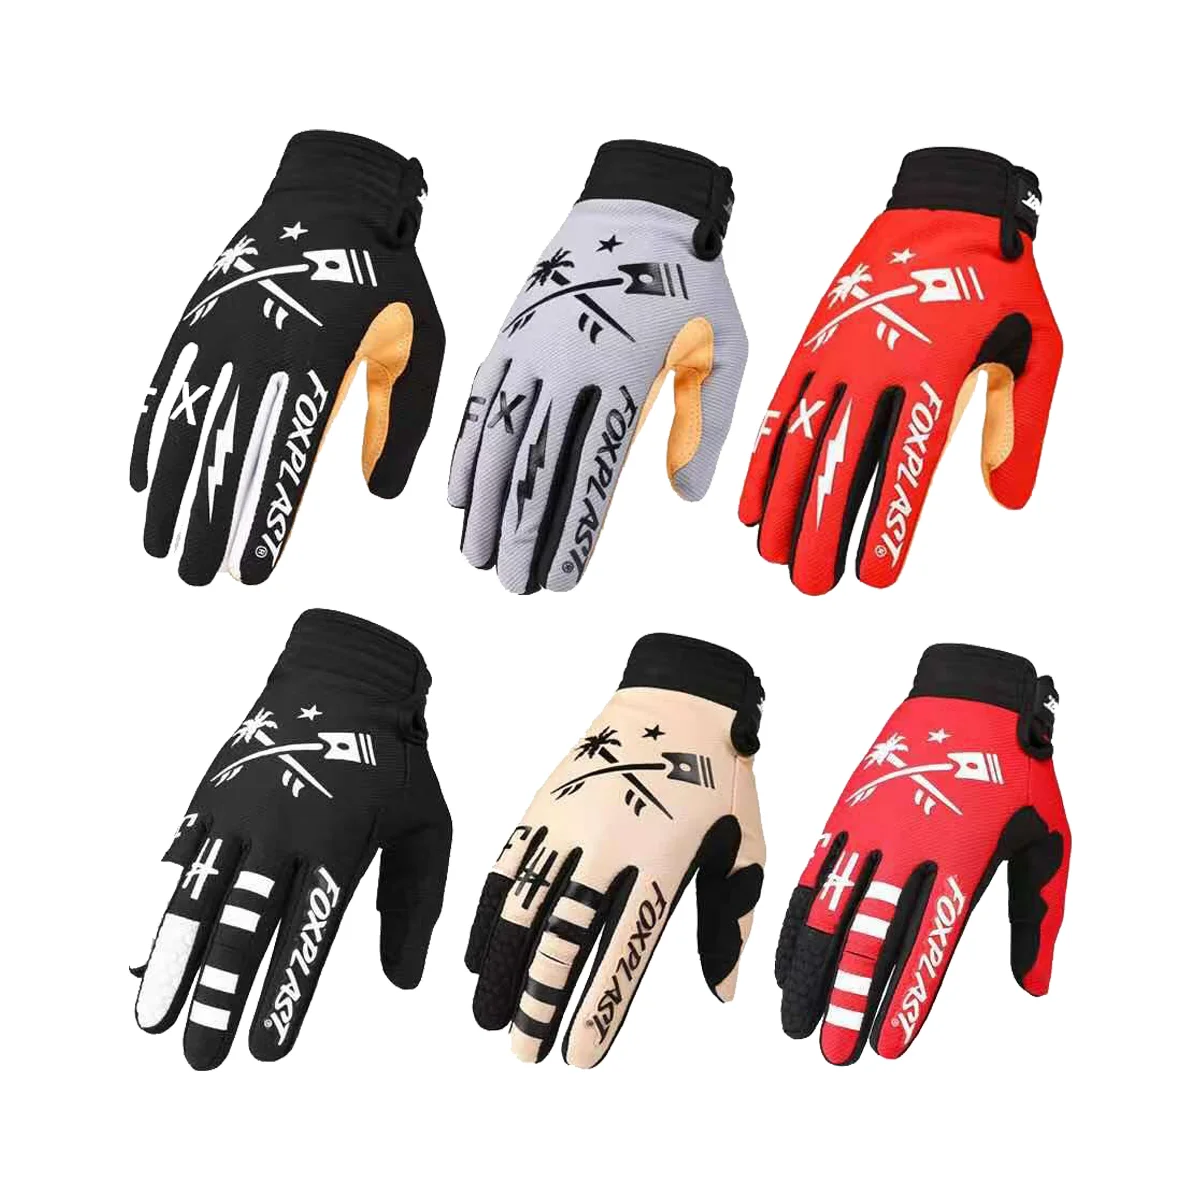 

Foxplast Motocross Gloves/Women Off Road MTB Mountain Bike Racing glove/bicycle BMX ANT MX Gloves Motorcycle Cycling Gloves